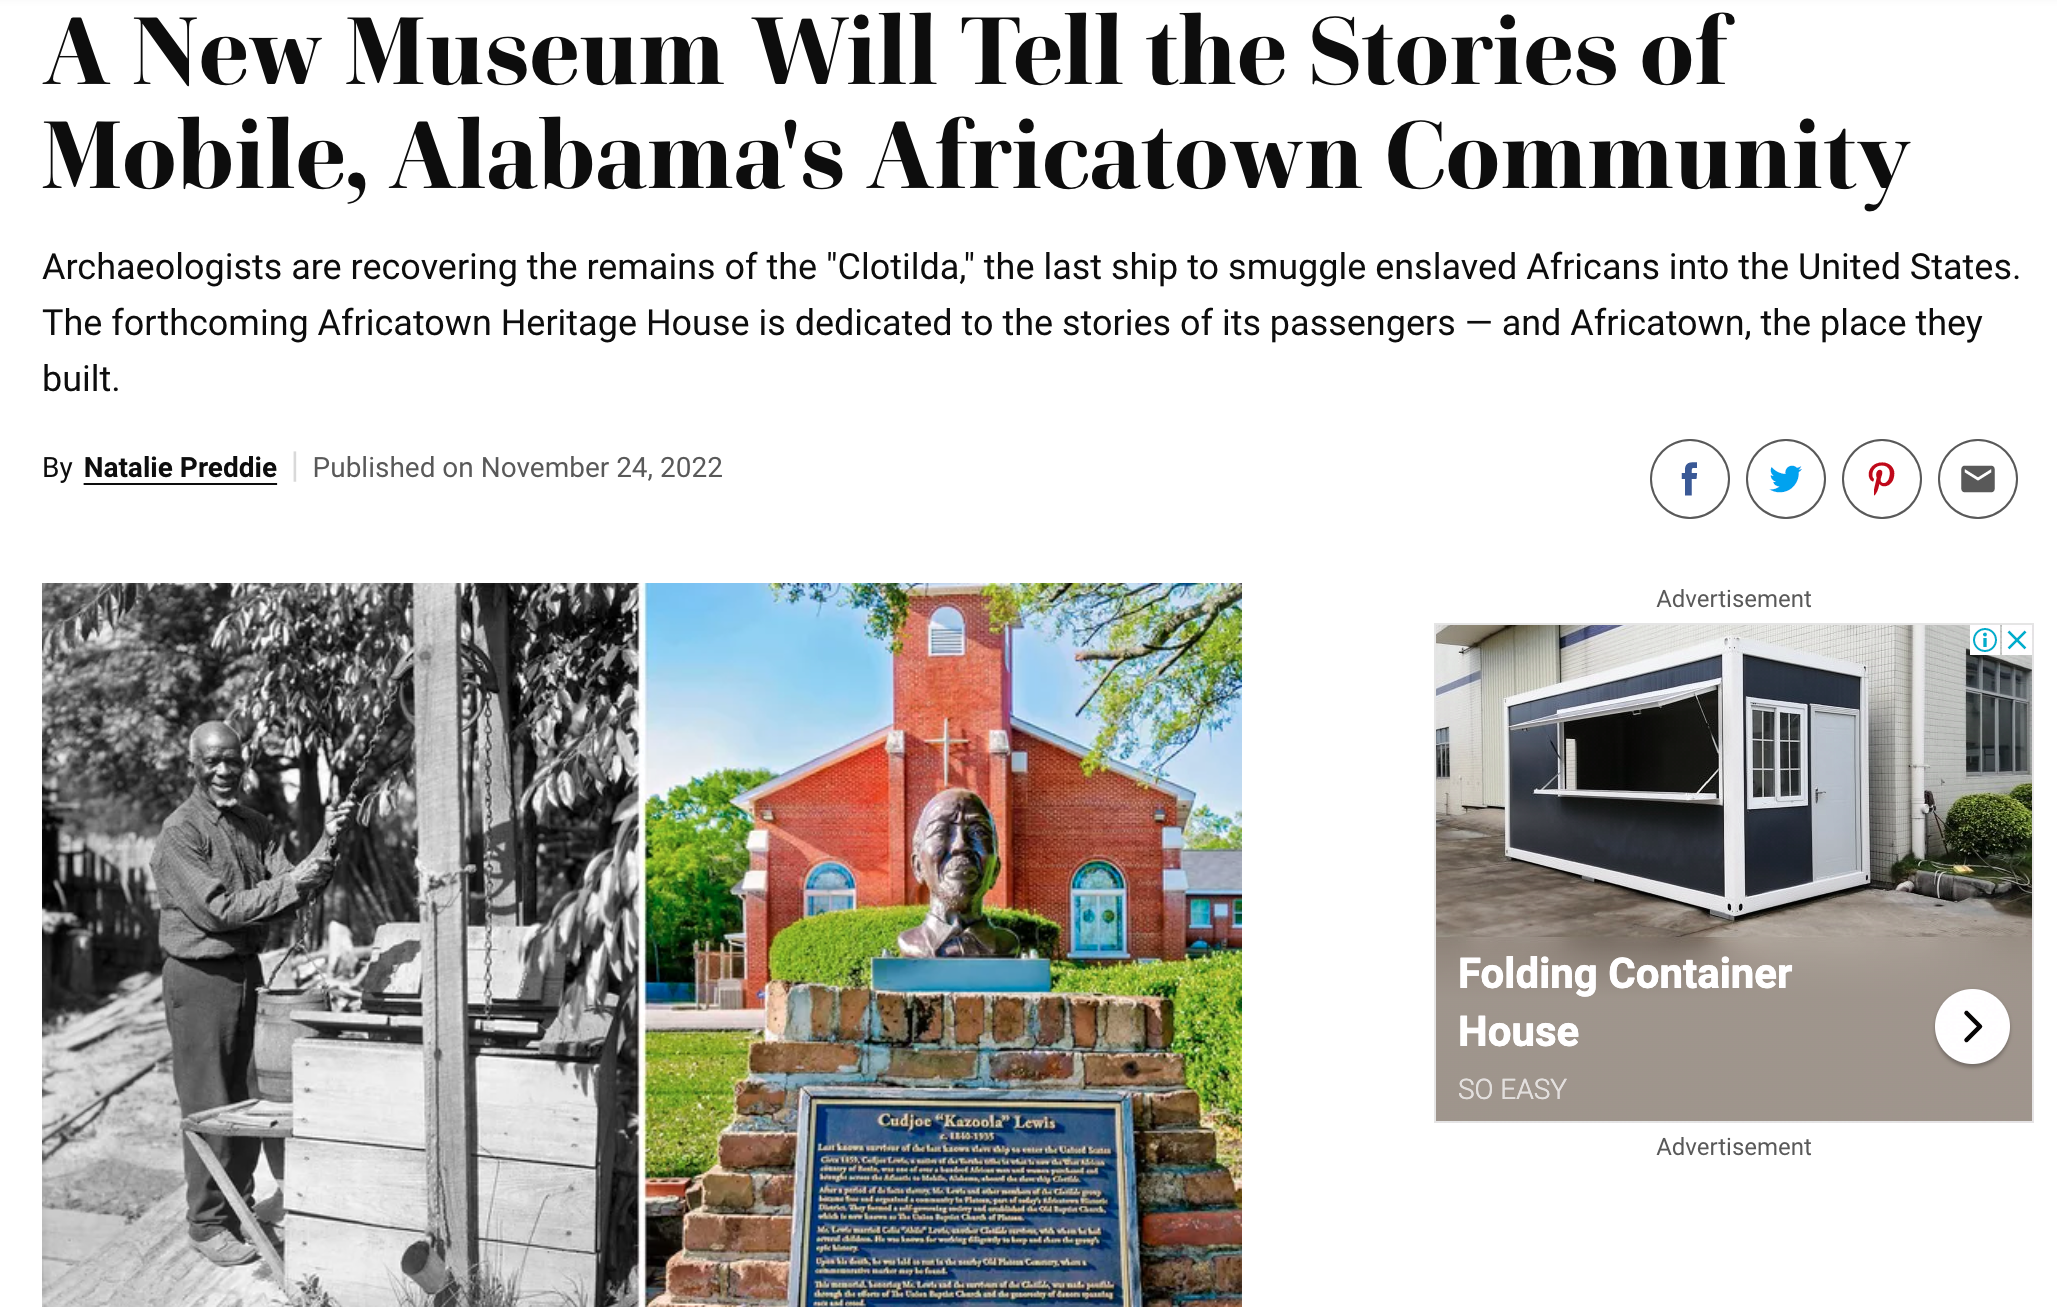 A New Museum Will Tell the Stories of Mobile, Alabama’s Africatown Community